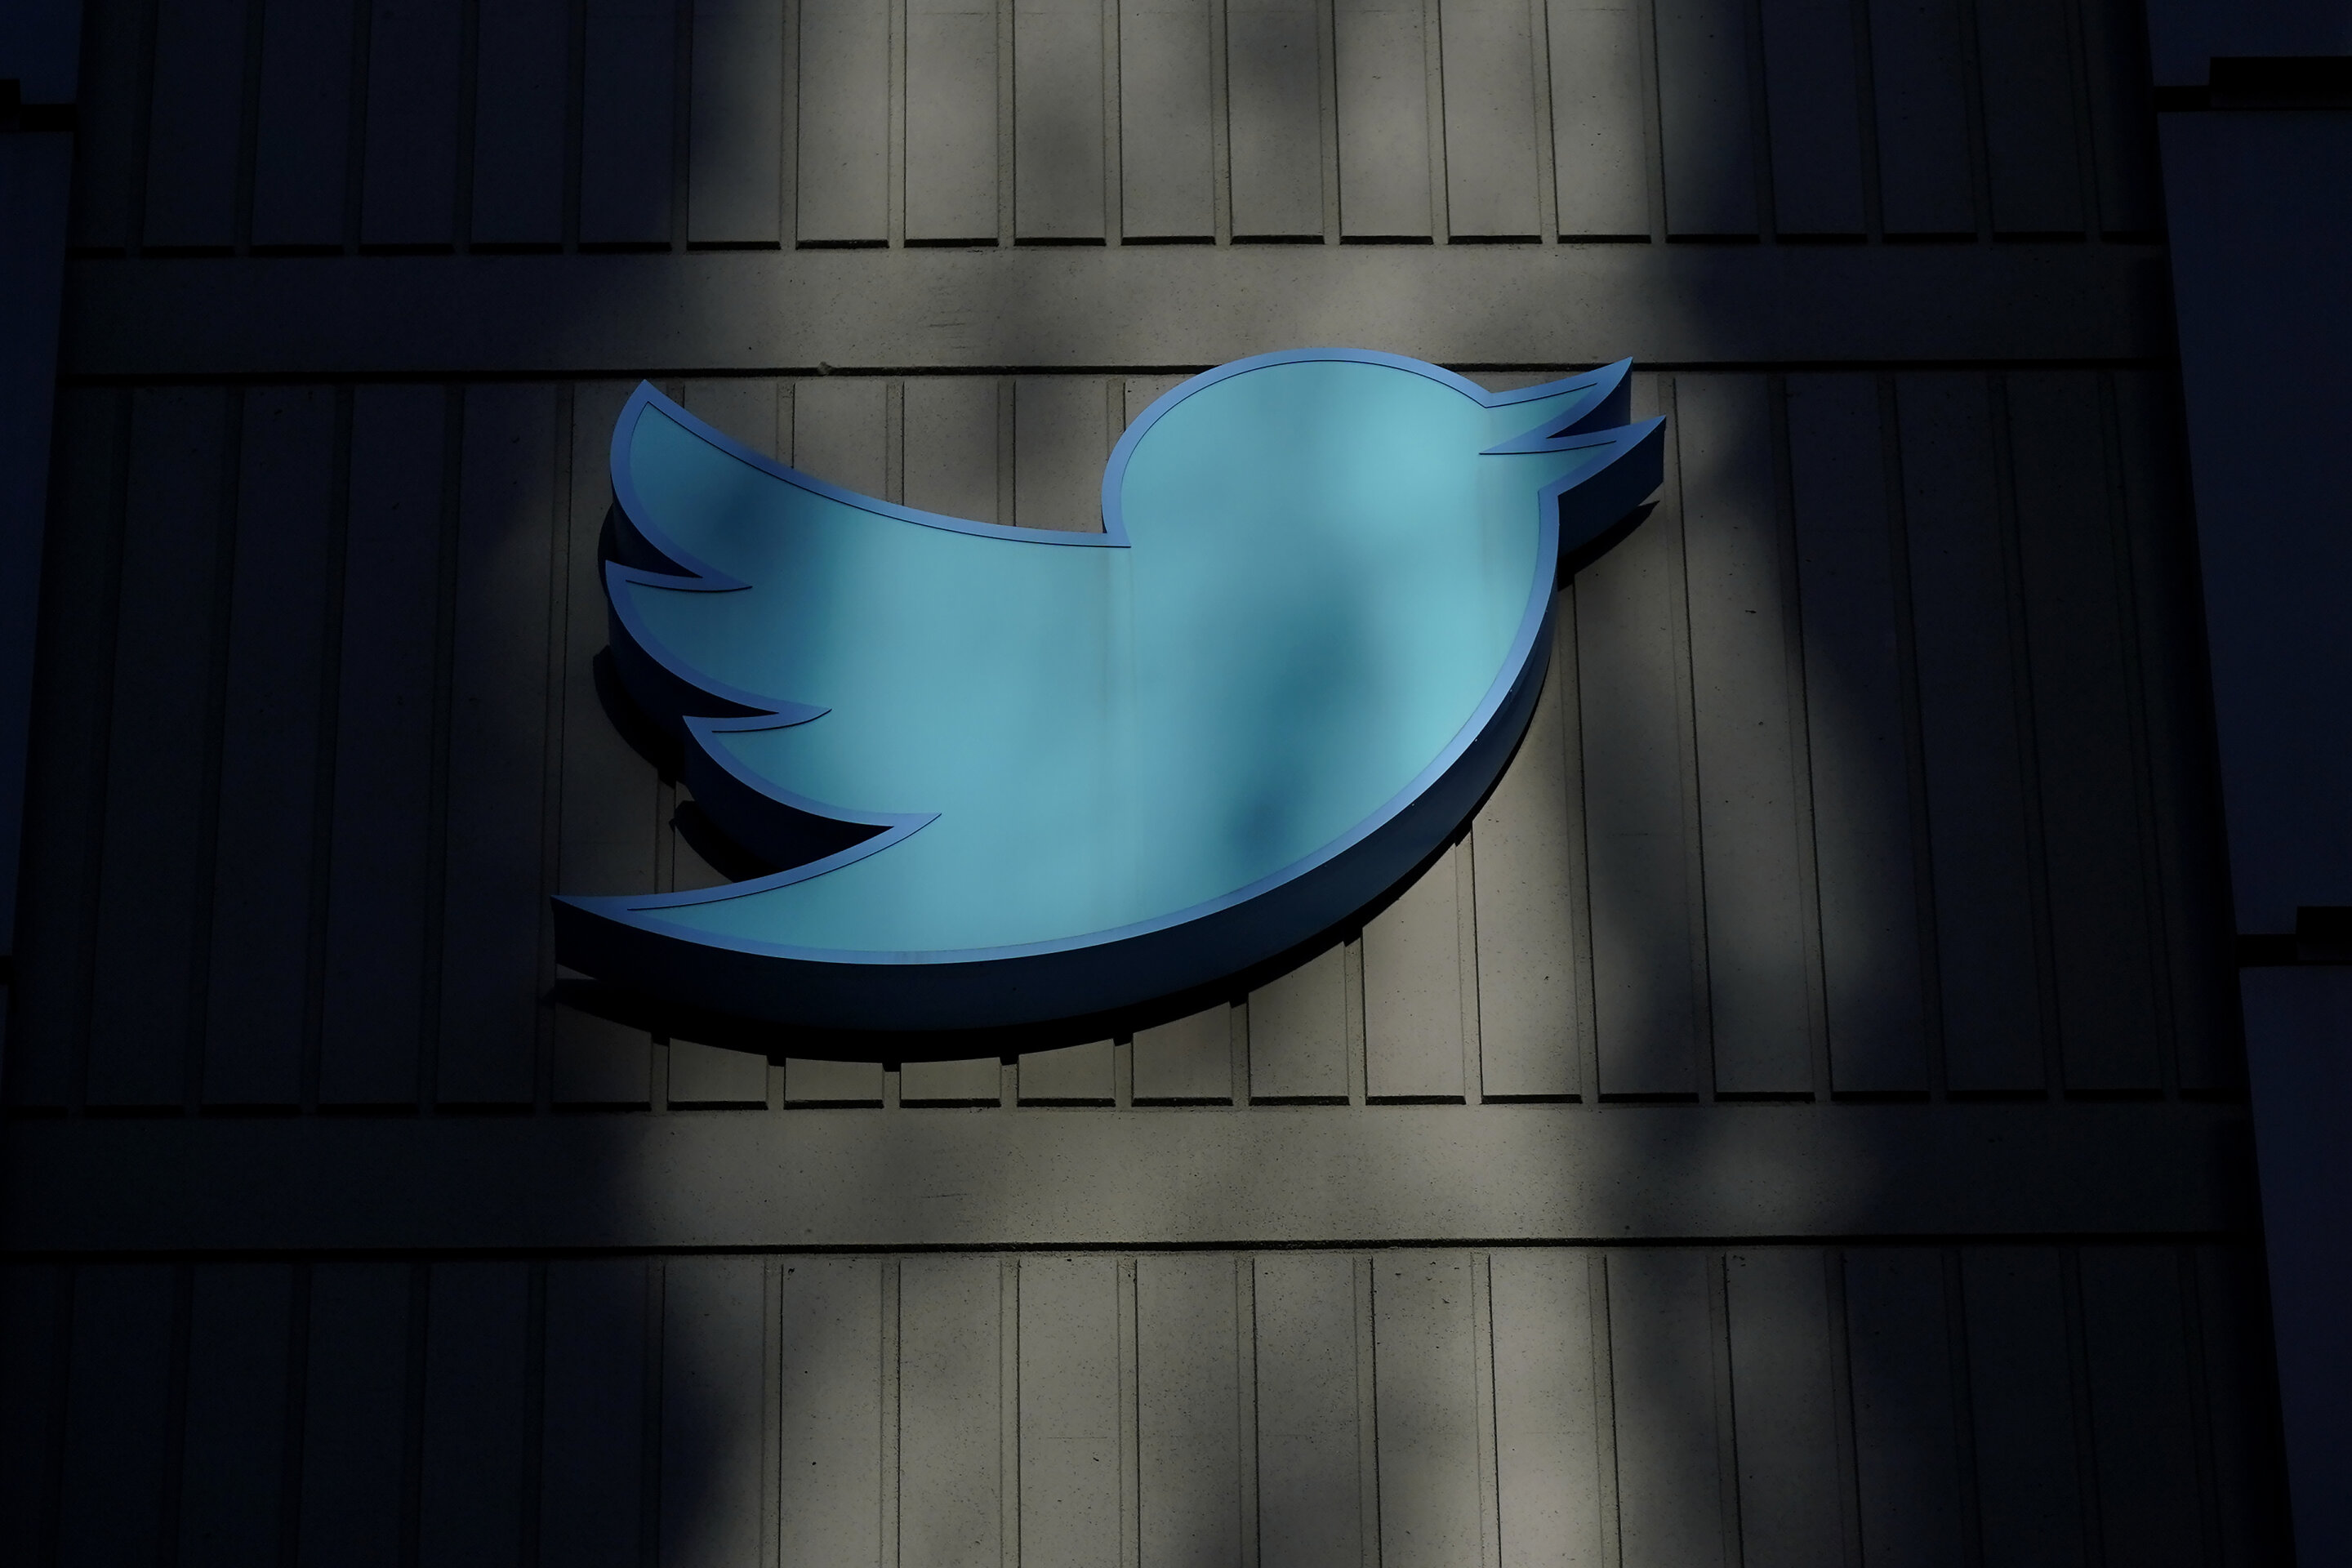 #Twitter, others slip on removing hate speech, EU review says